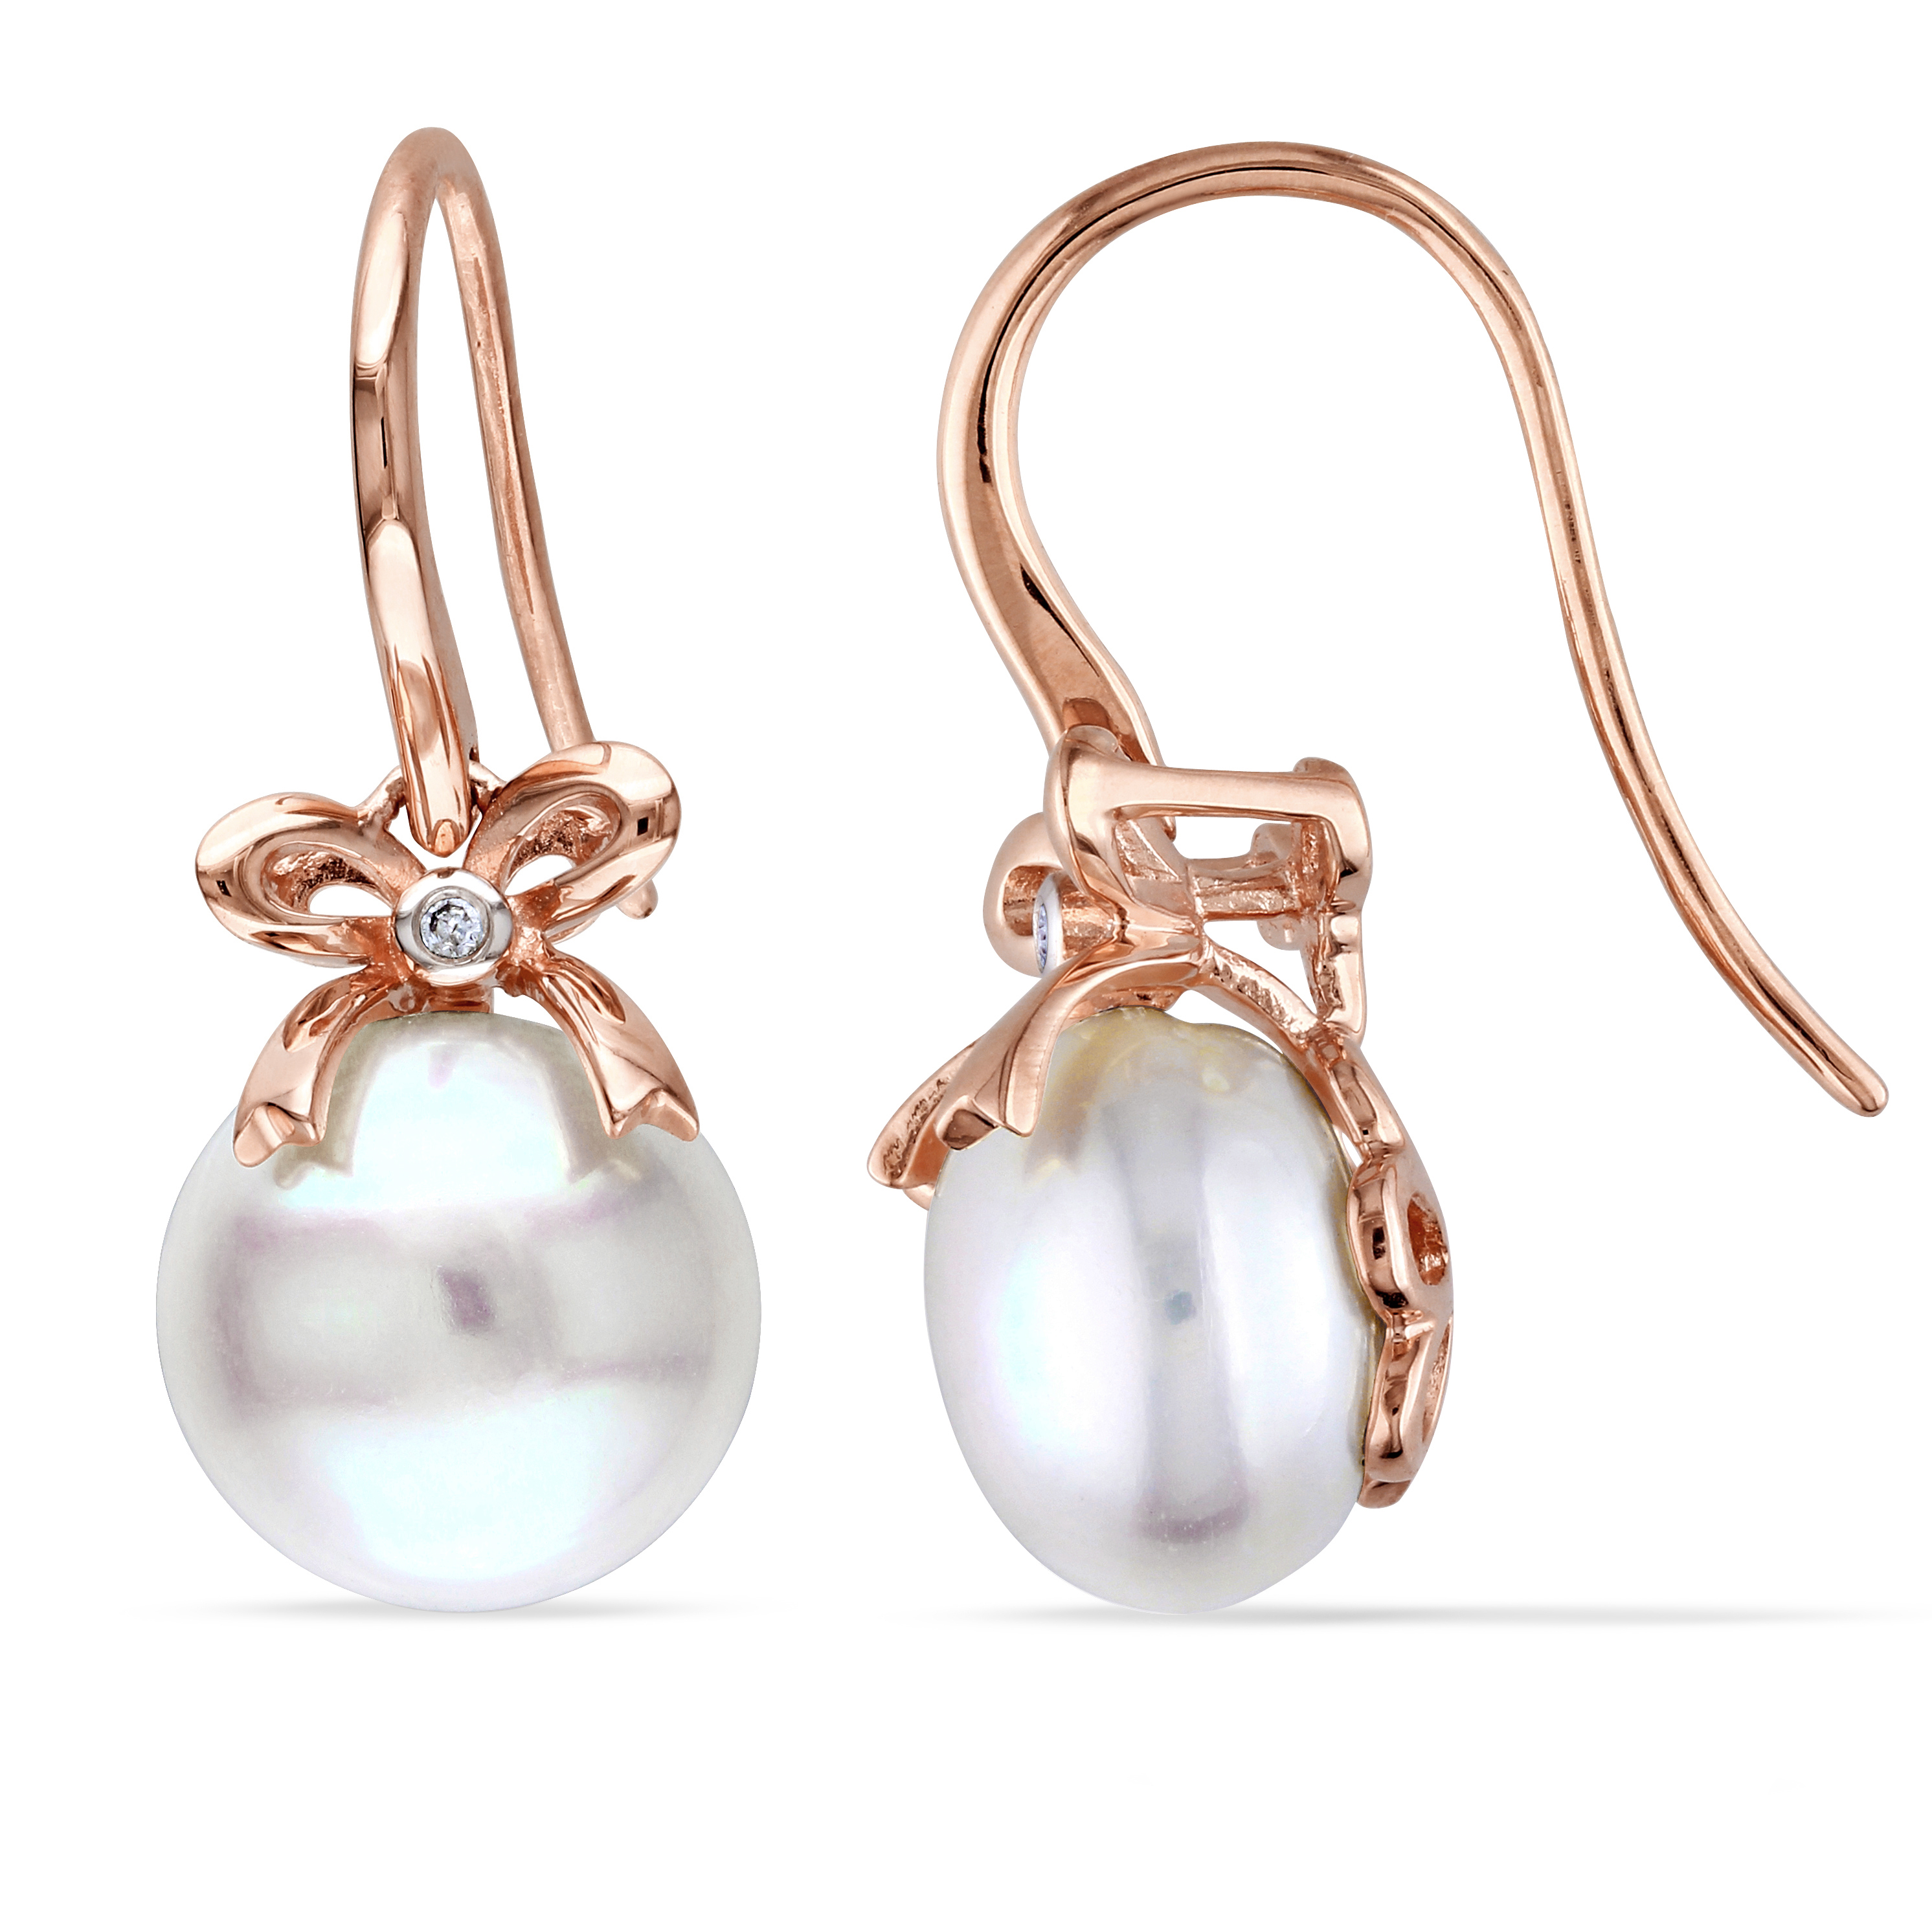 10.5 - 11 MM Cultured Freshwater Pearl and Diamond Bow Drop Hook Earrings in 10k Rose Gold